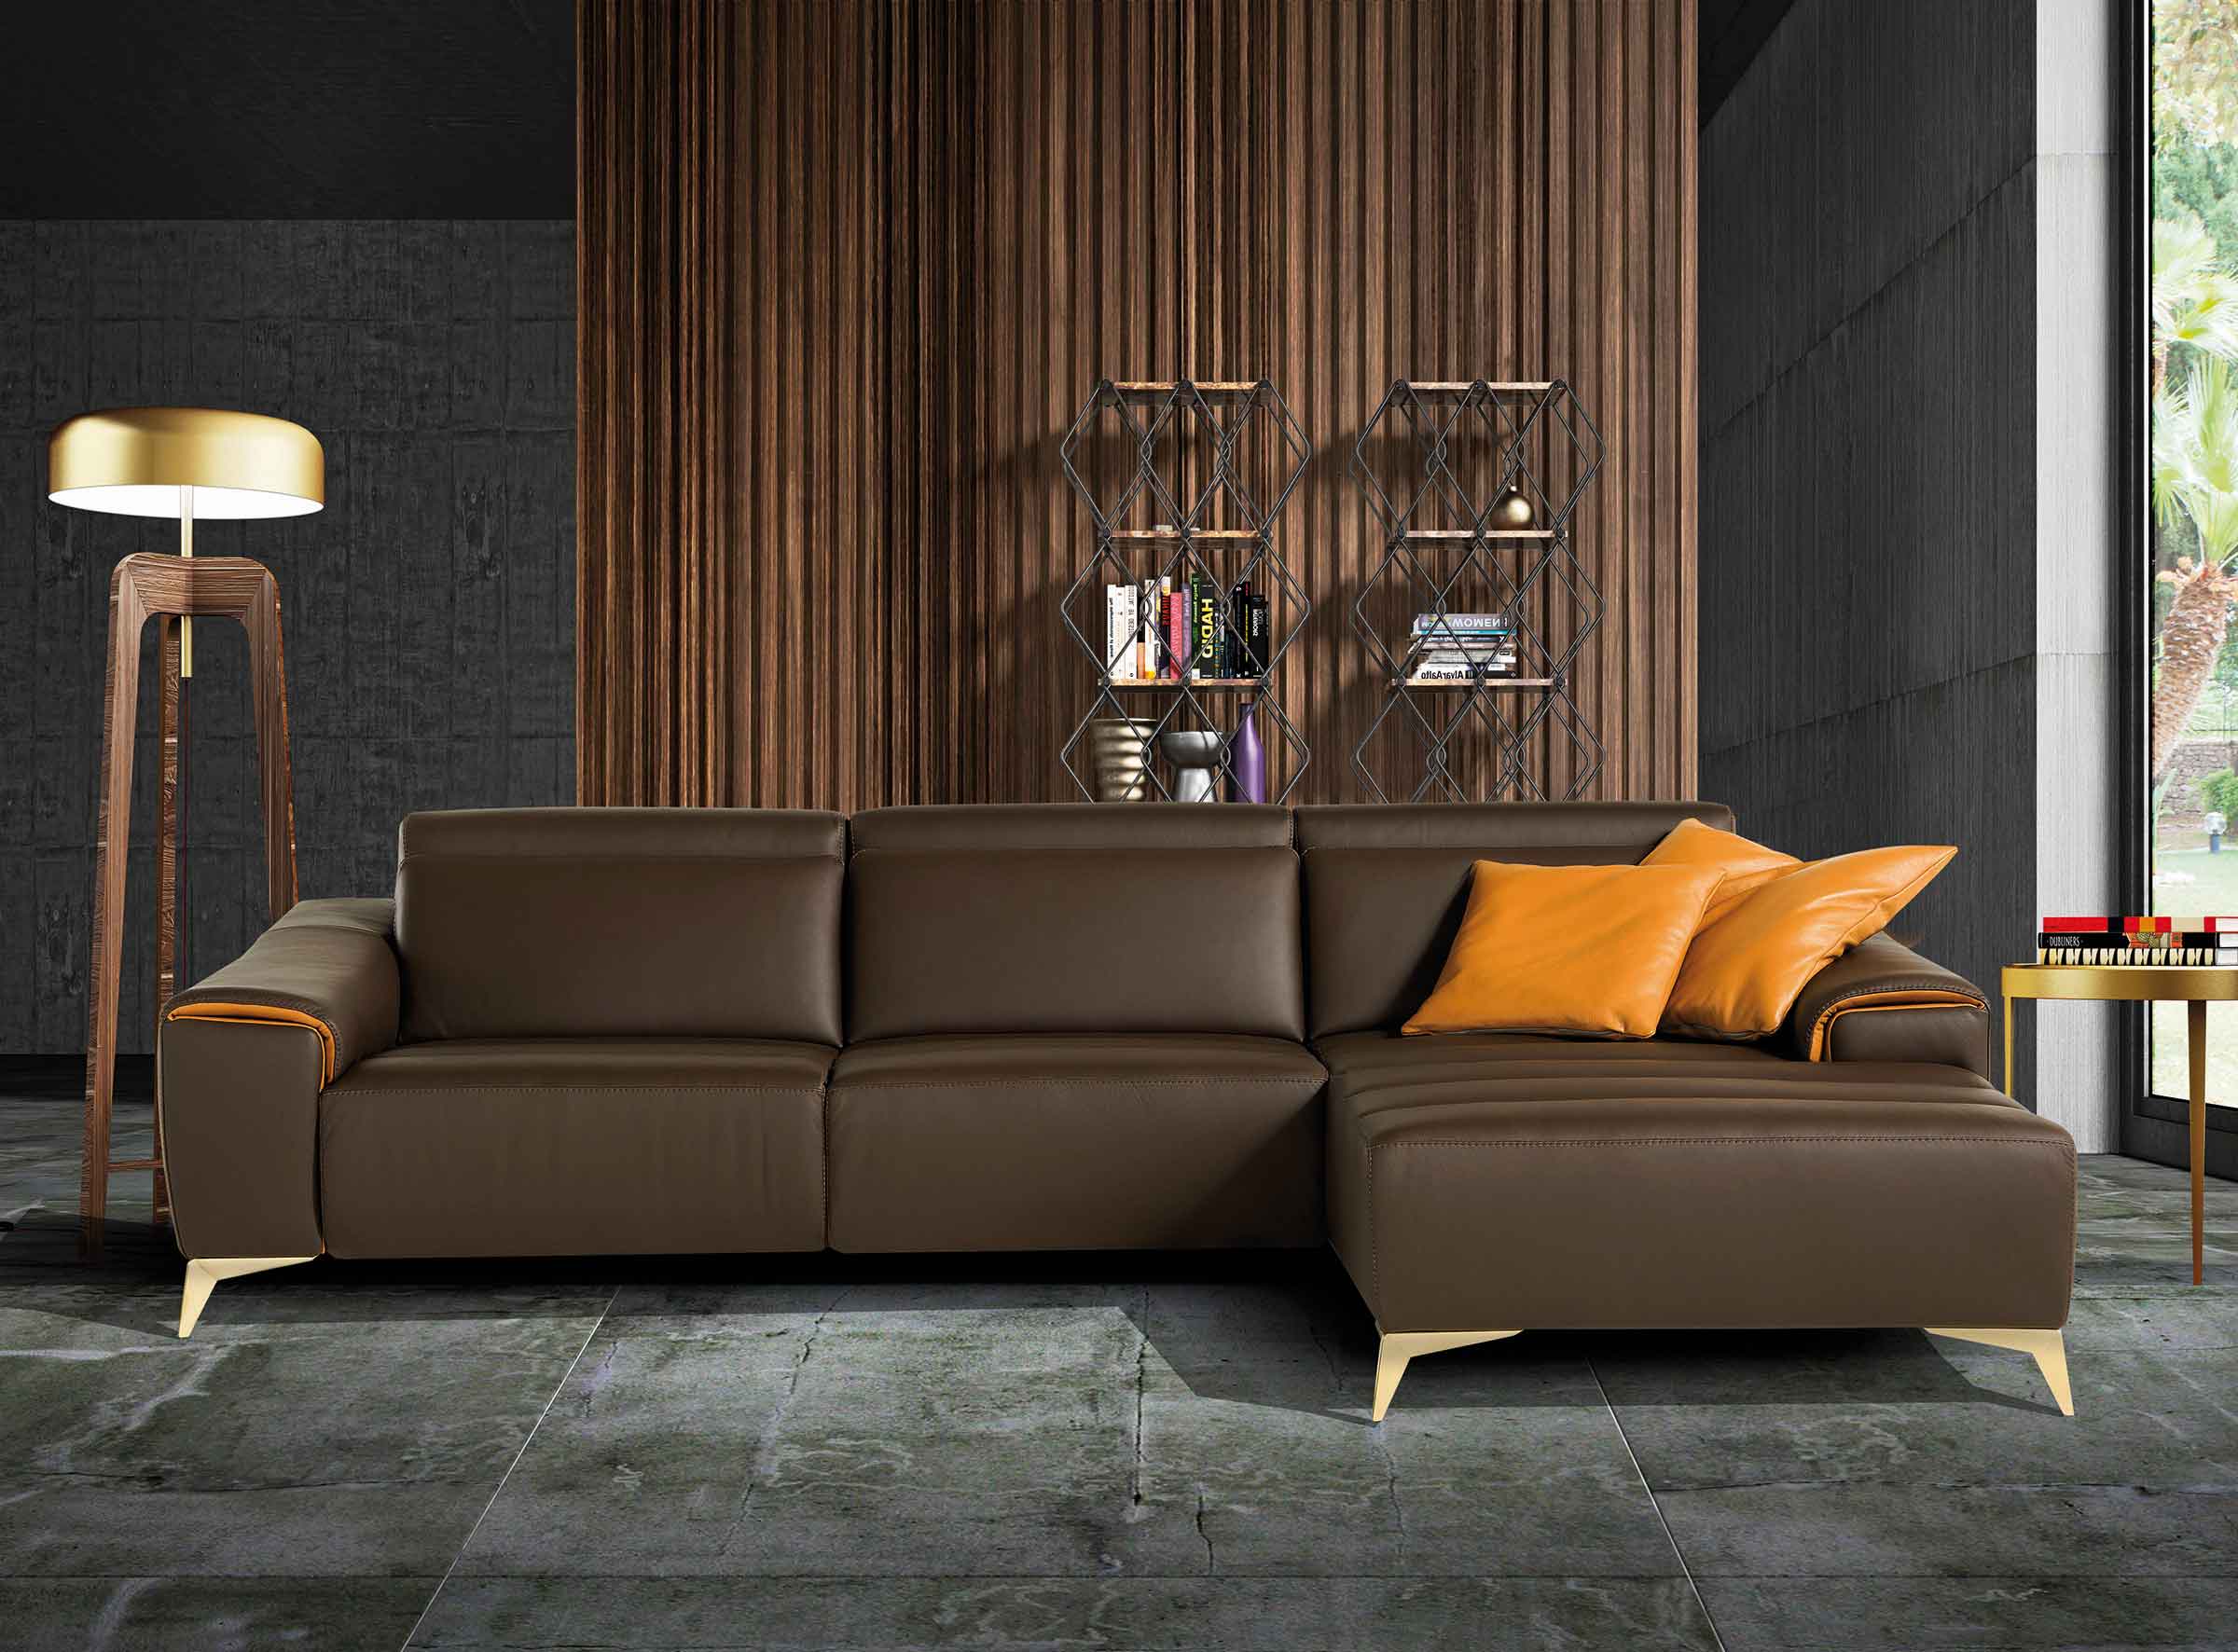 Suzette sofa with chaise